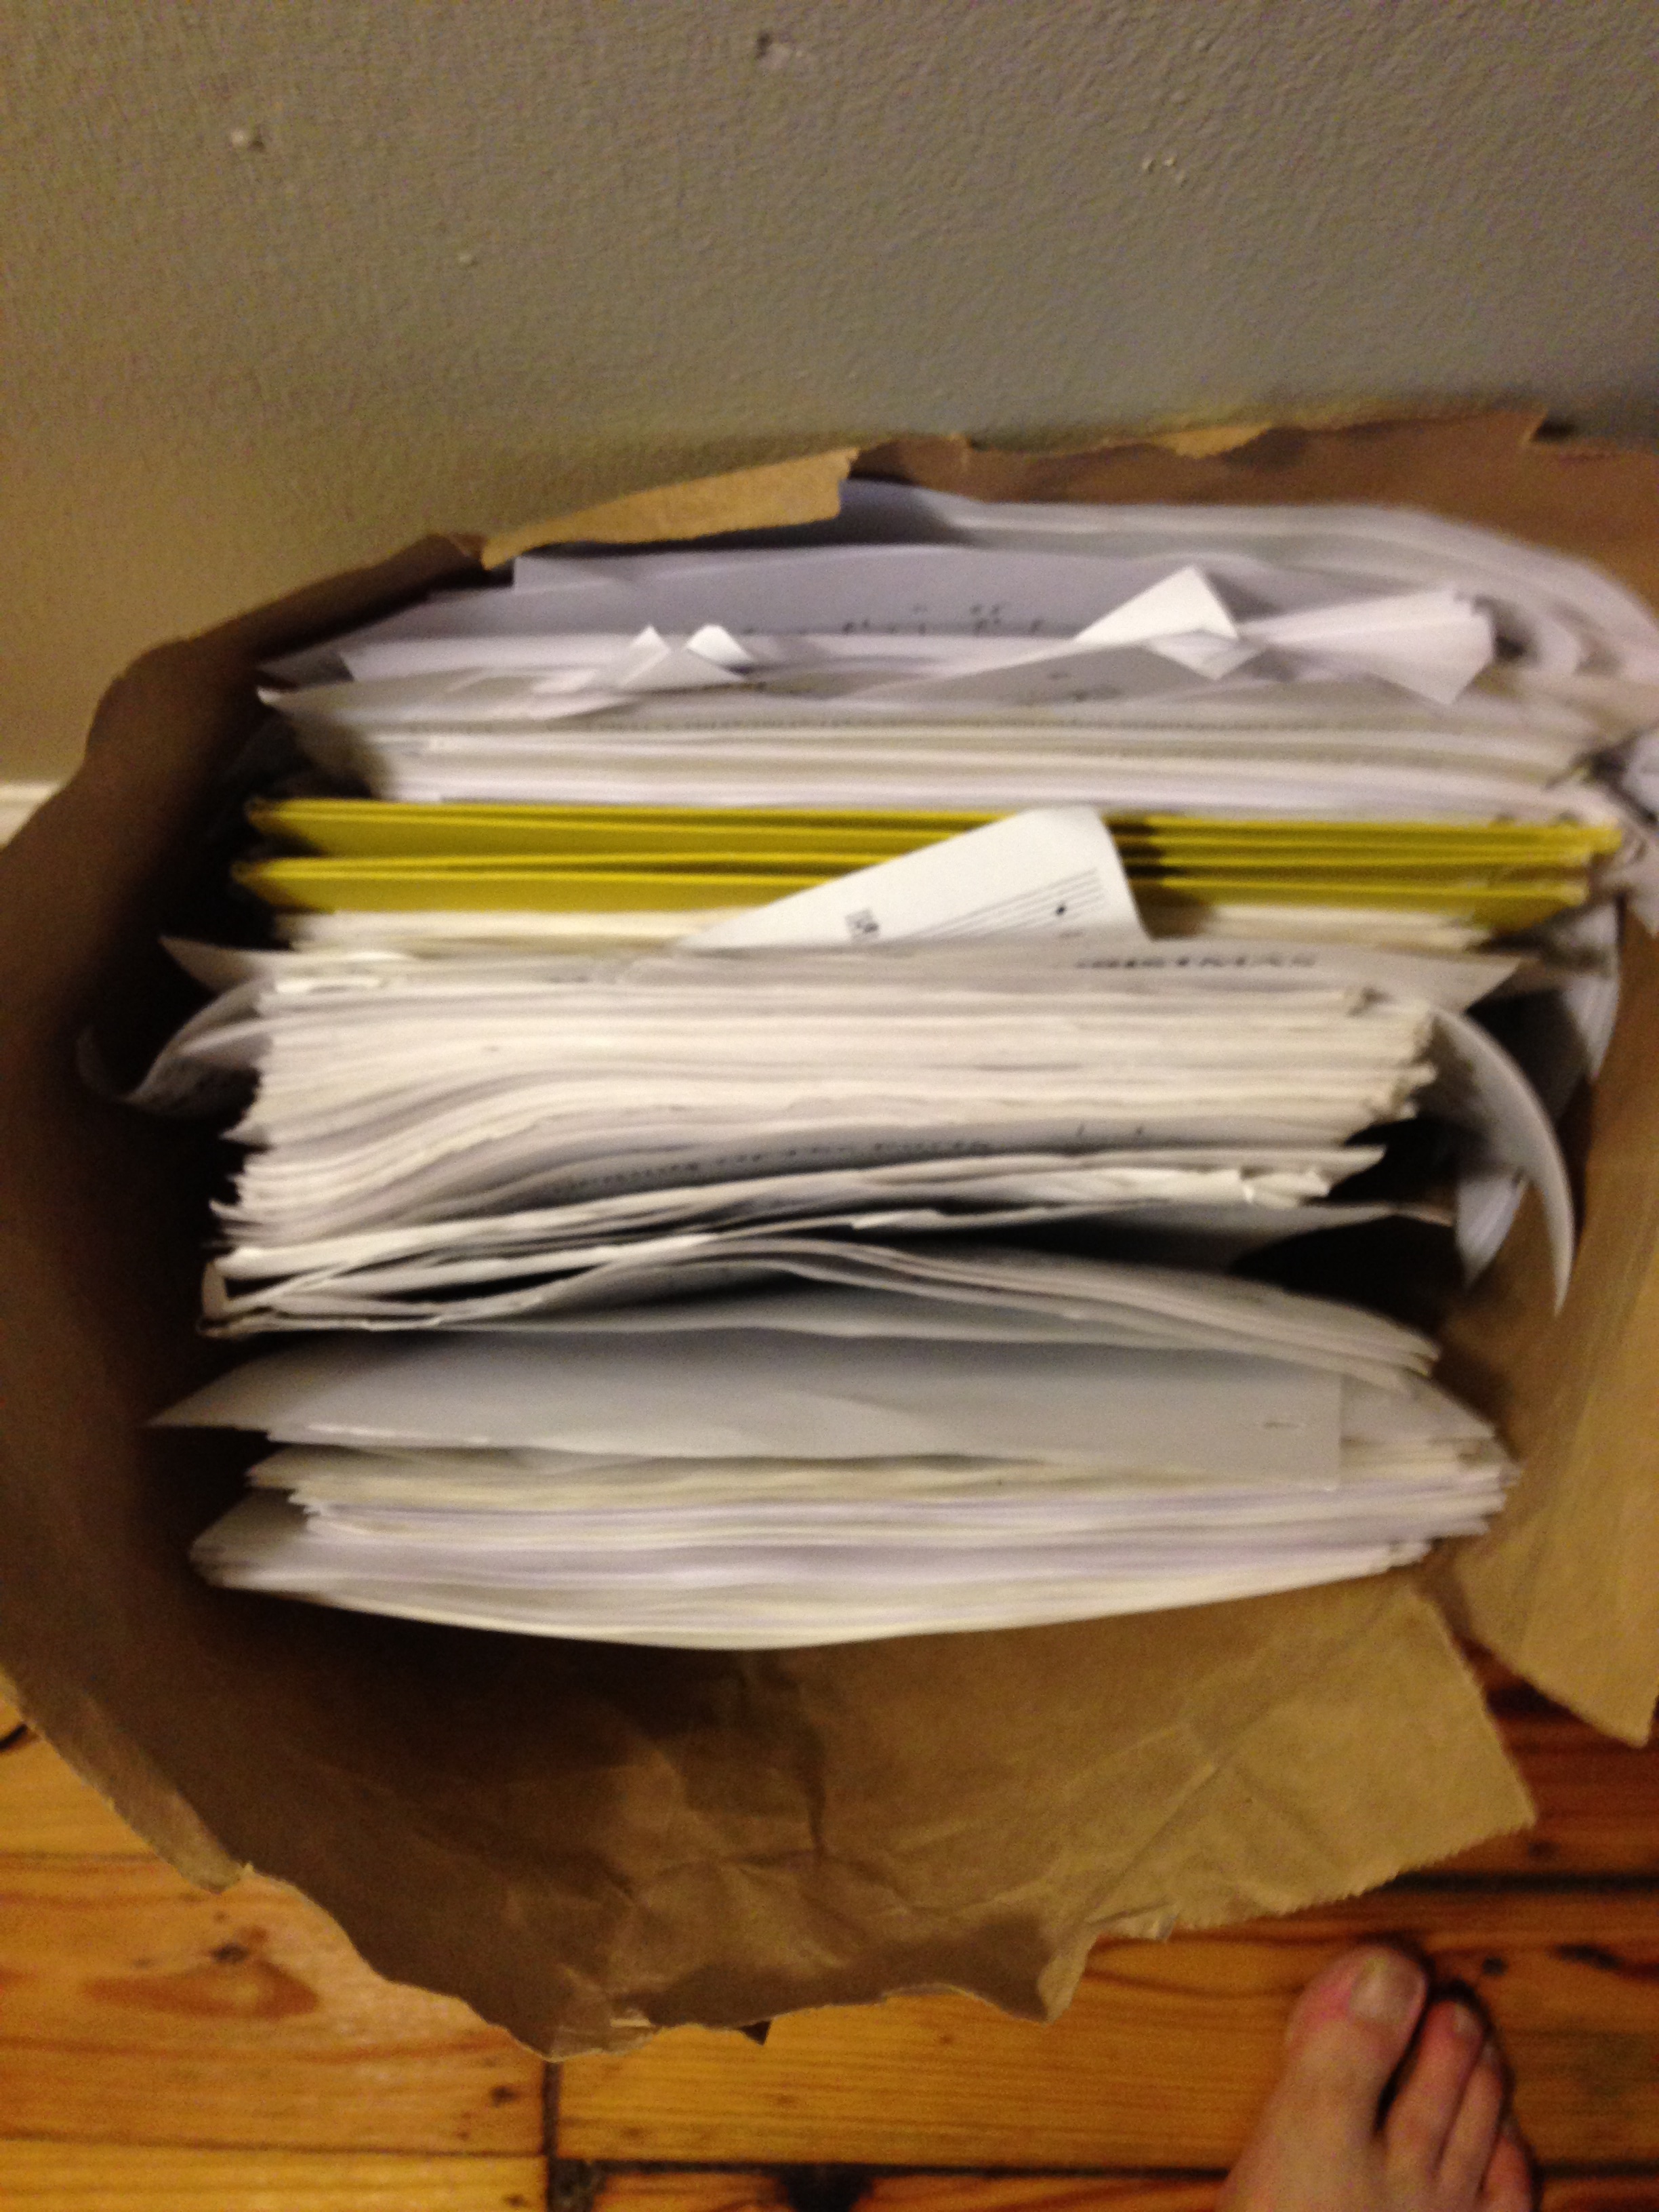 I scanned all of this sheet music over Monday and Tuesday, emptying 4 binders and getting them off of my shelf for good!